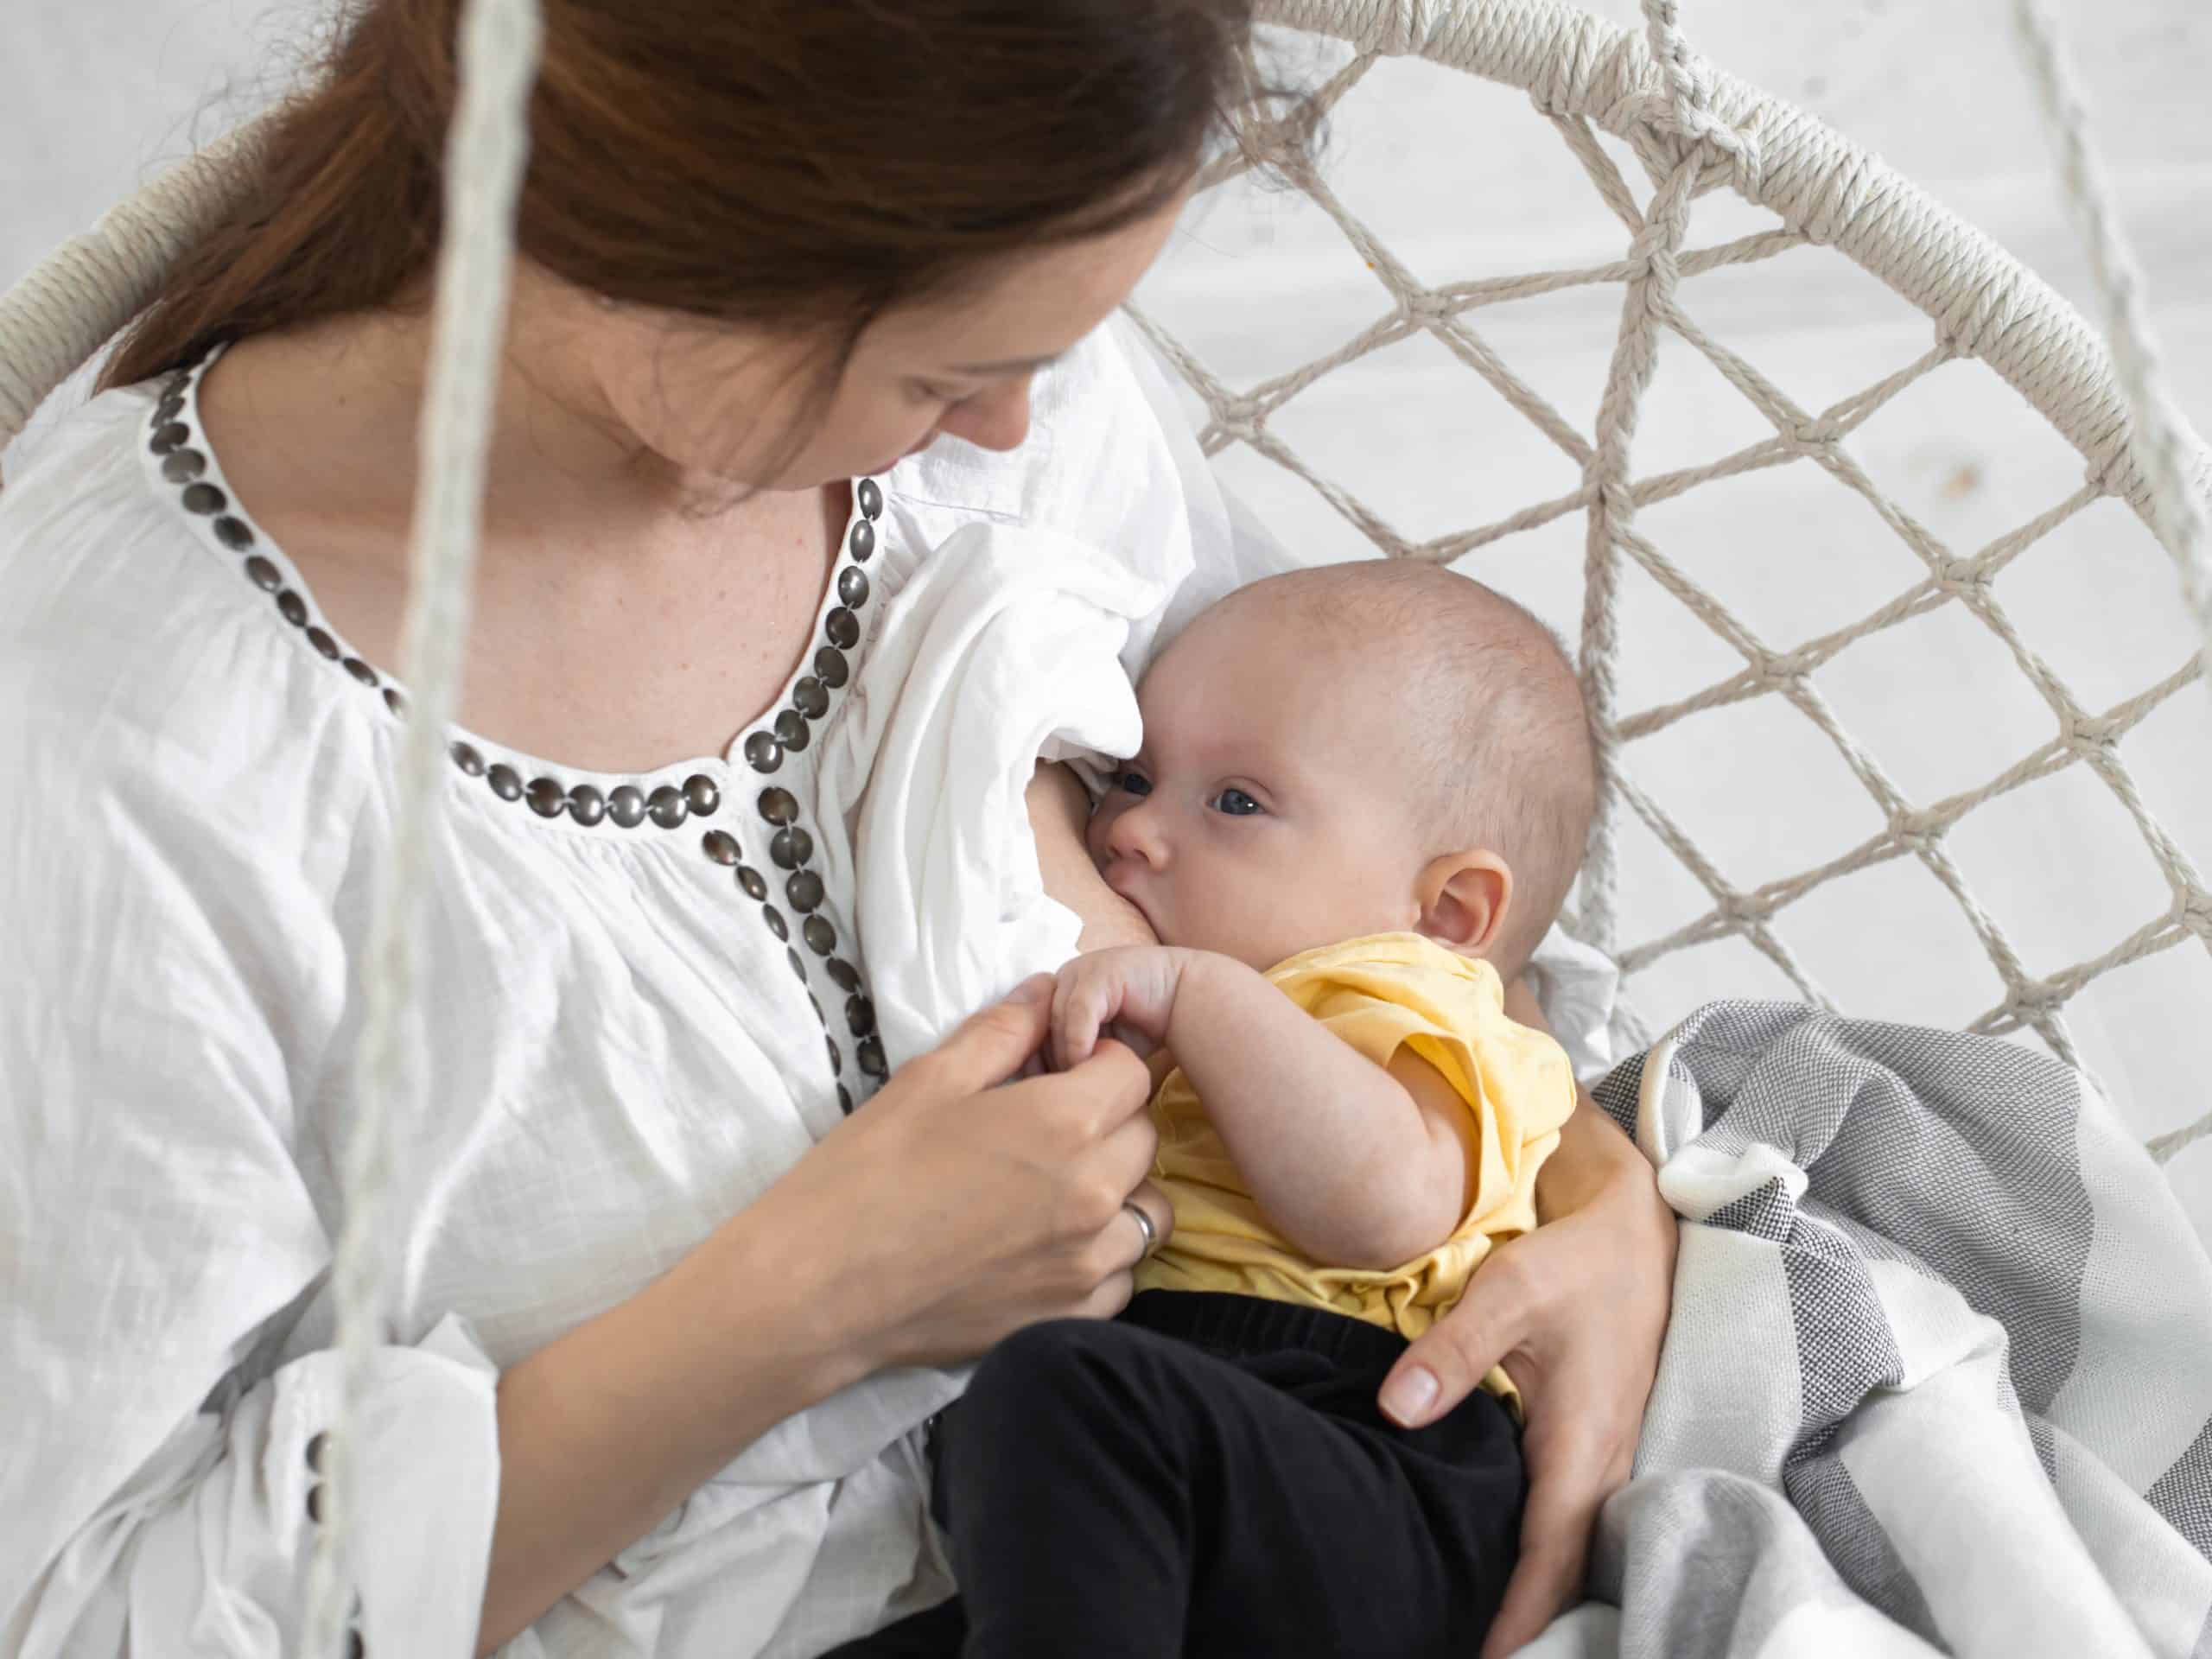 Mom breastfeeds her newborn baby in a white hammock chair on a light background. Breastfeeding concept, close up.